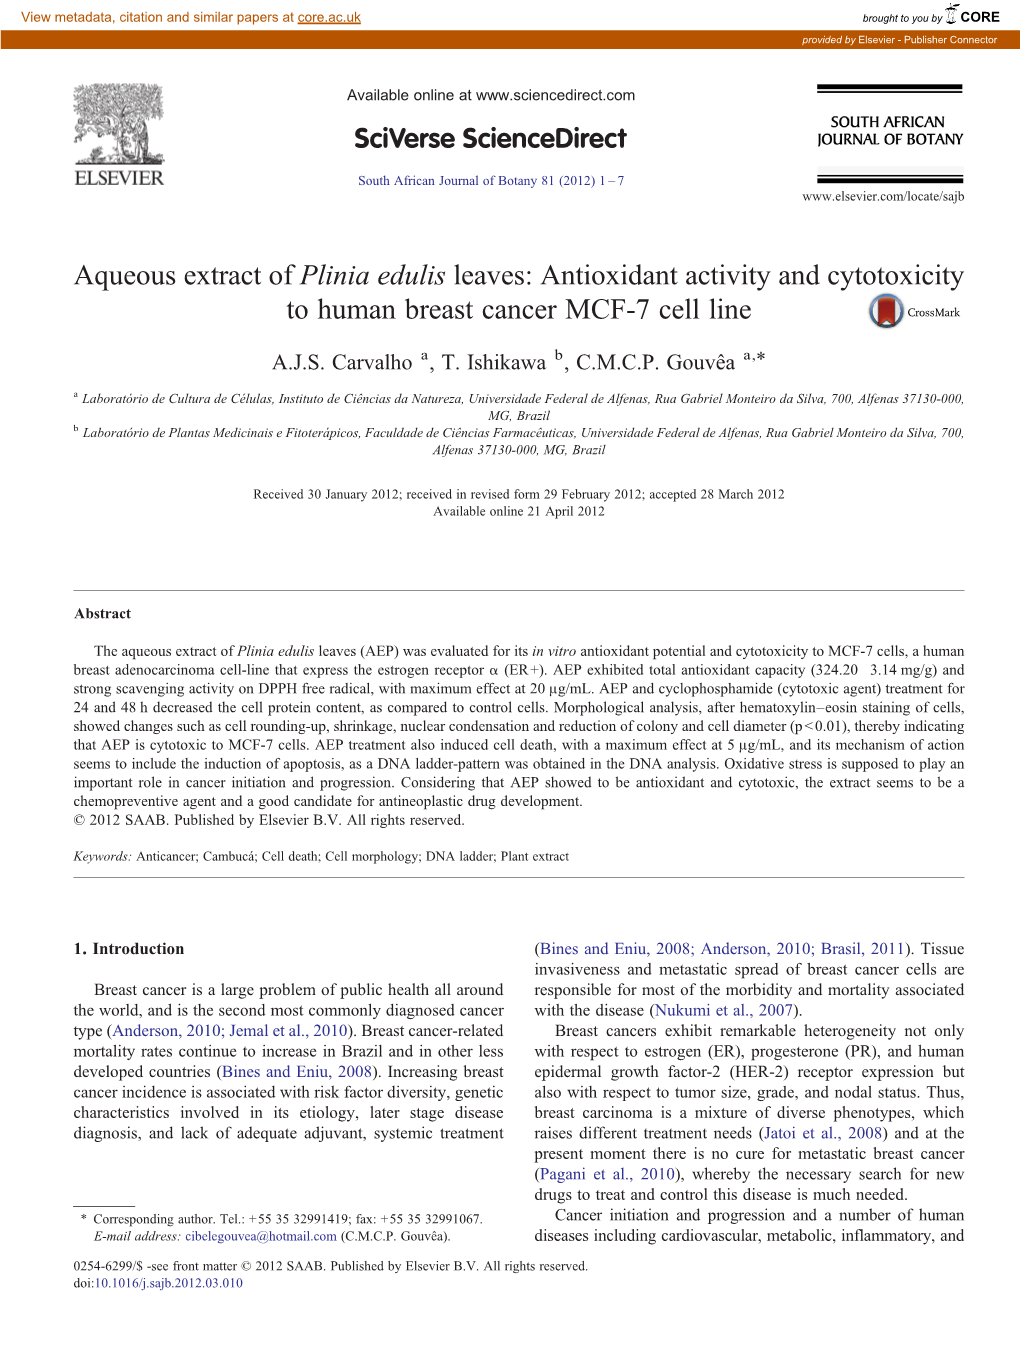 Plinia Edulis Leaves: Antioxidant Activity and Cytotoxicity to Human Breast Cancer MCF-7 Cell Line ⁎ A.J.S